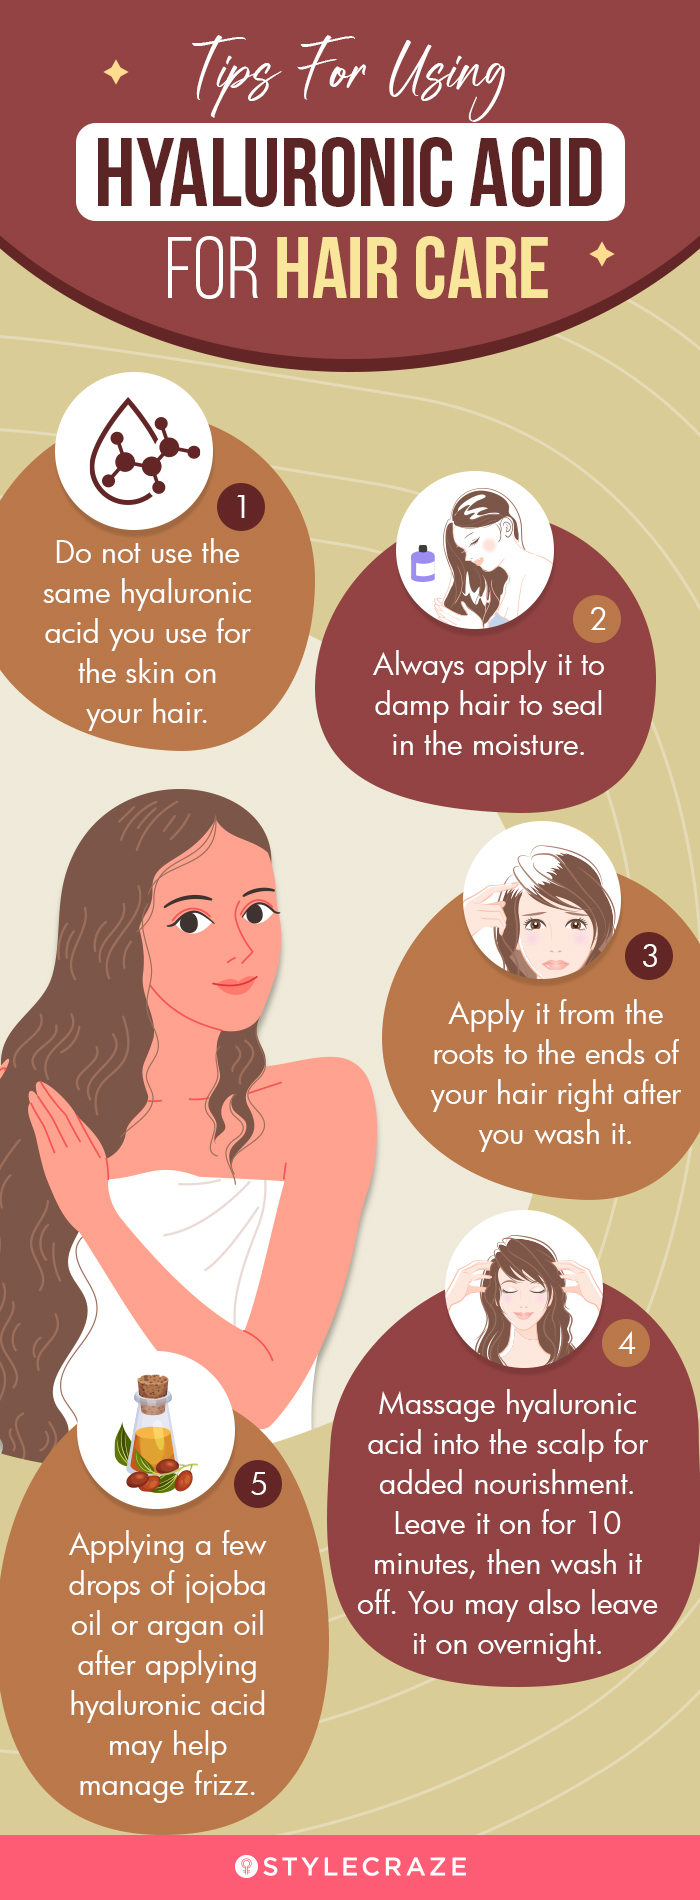 tips for using hyaluronic acid for hair care (infographic)